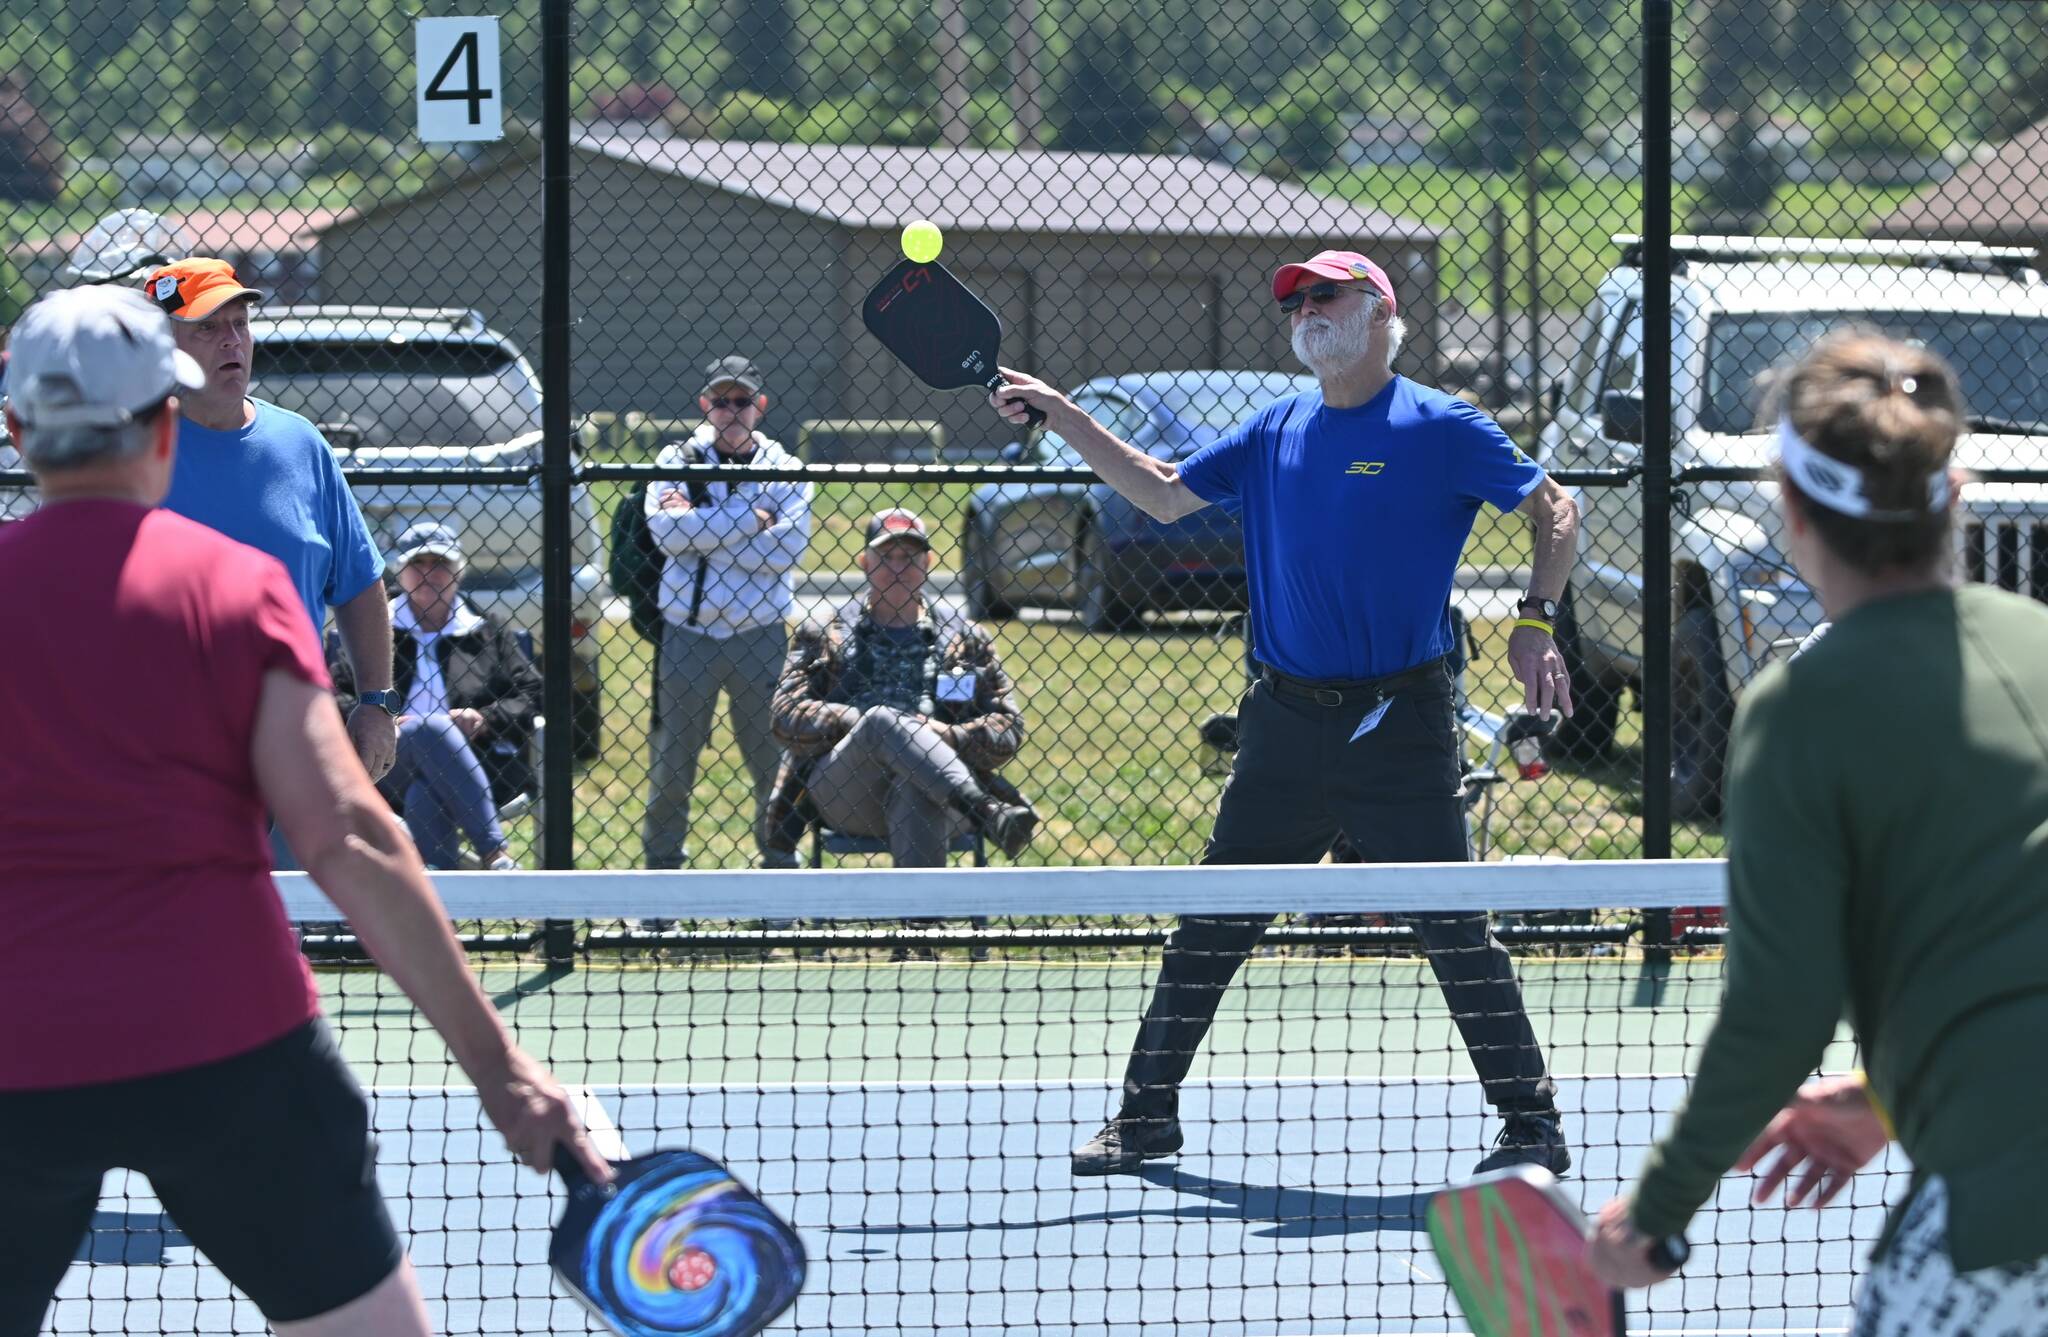 Sequim Gazette photo by Michael Dashiell / Mike Richer, right, and Kevin Jenks take on Sherri Gyovai and Cindi Pettit in the championship match at the Big Dill Fun Day tournament at Carrie Blake Community Park on May 20.